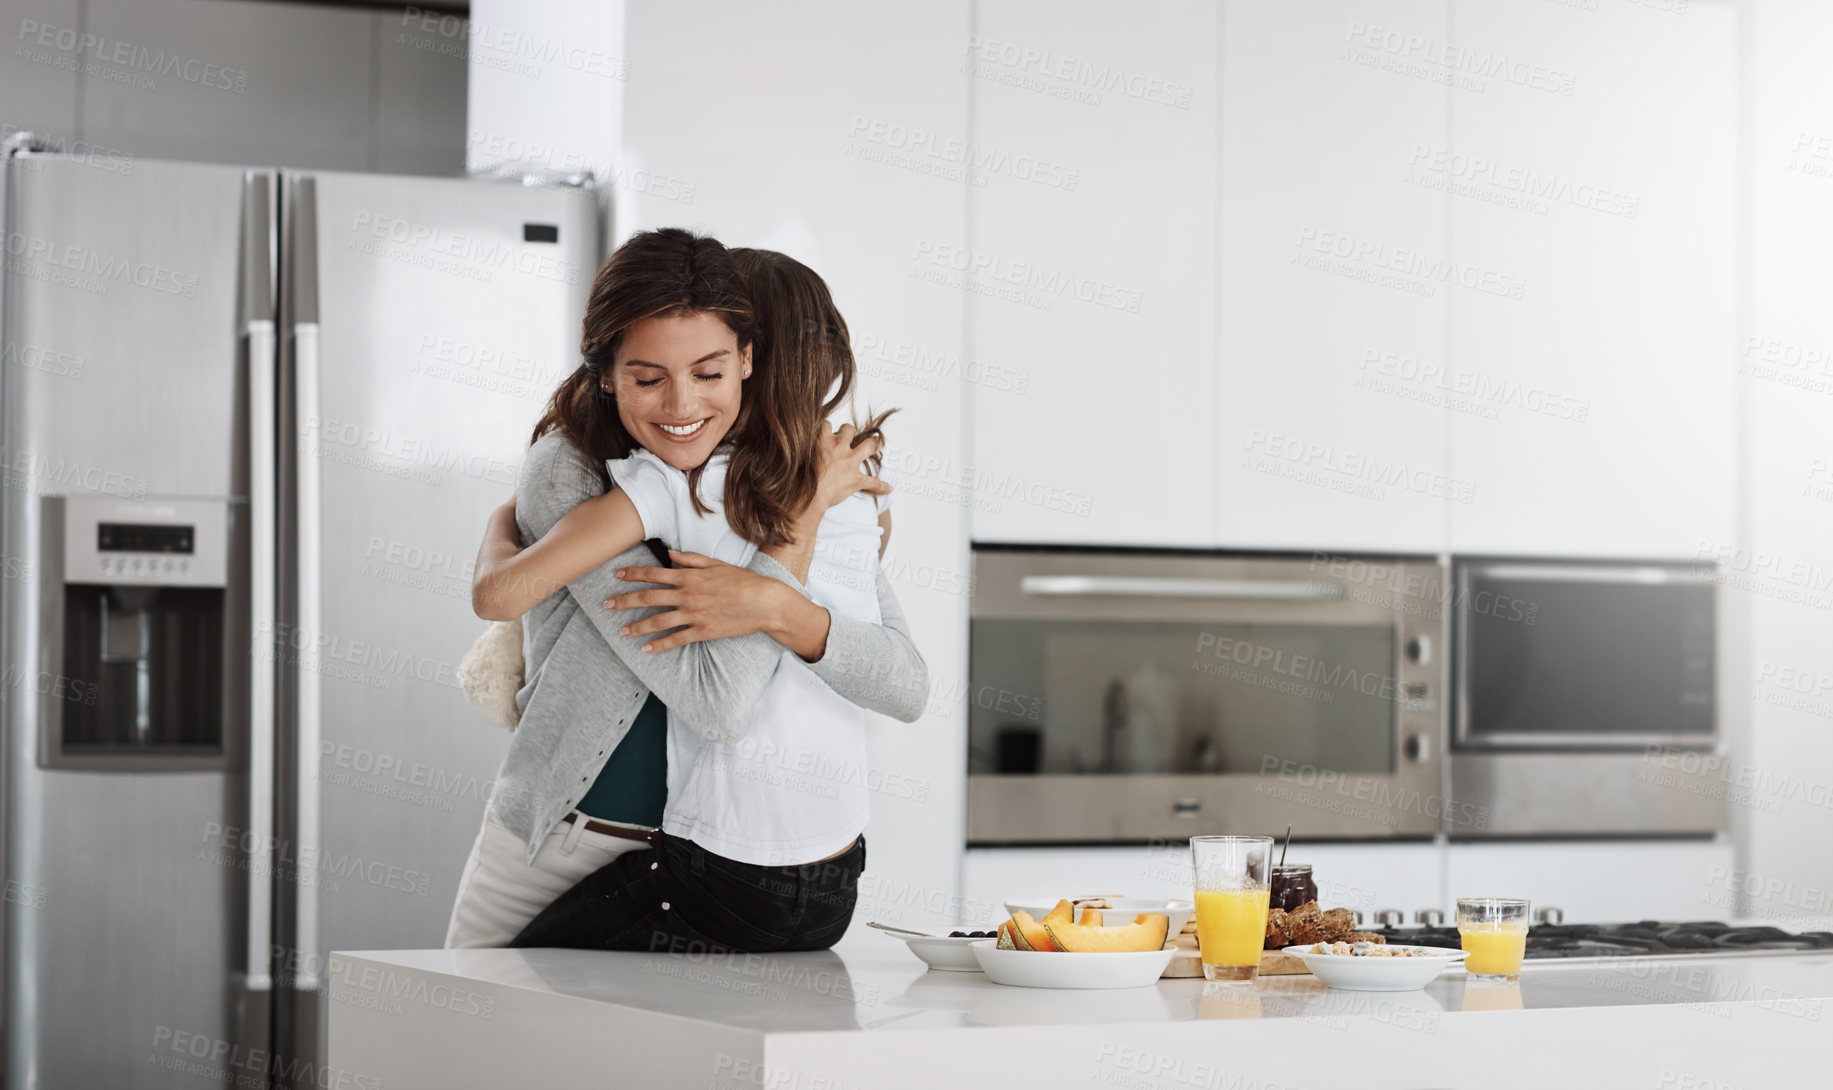 Buy stock photo Cropped shot of an attractive young woman and her daughter hugging while spending time together at home